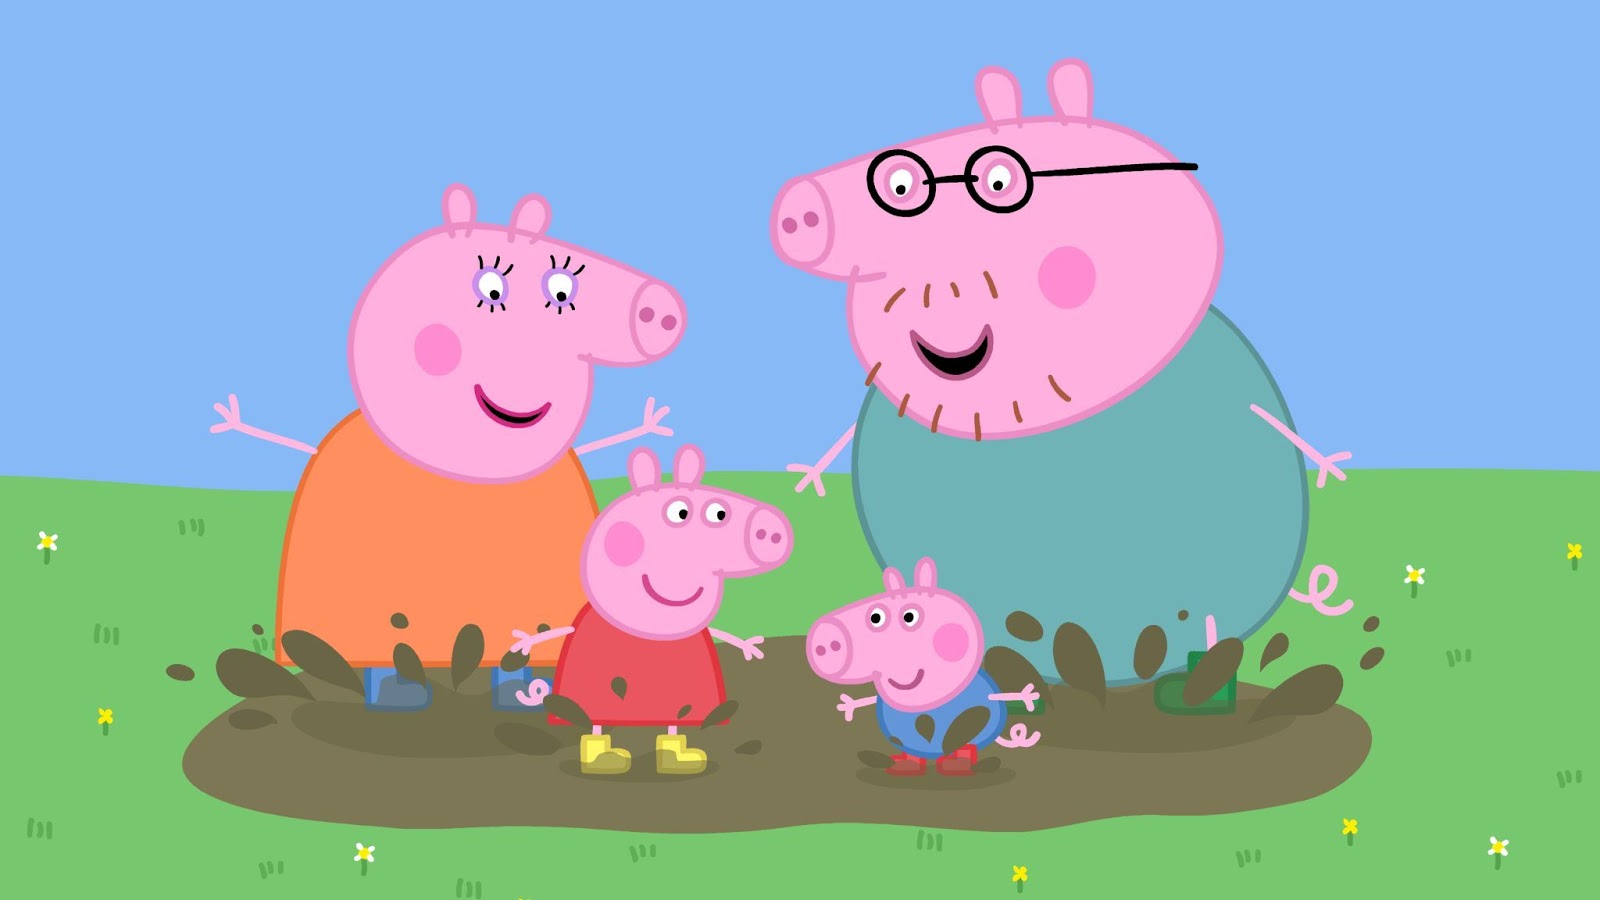 Orlando Bloom joins Katy Perry in special Peppa Pig guest